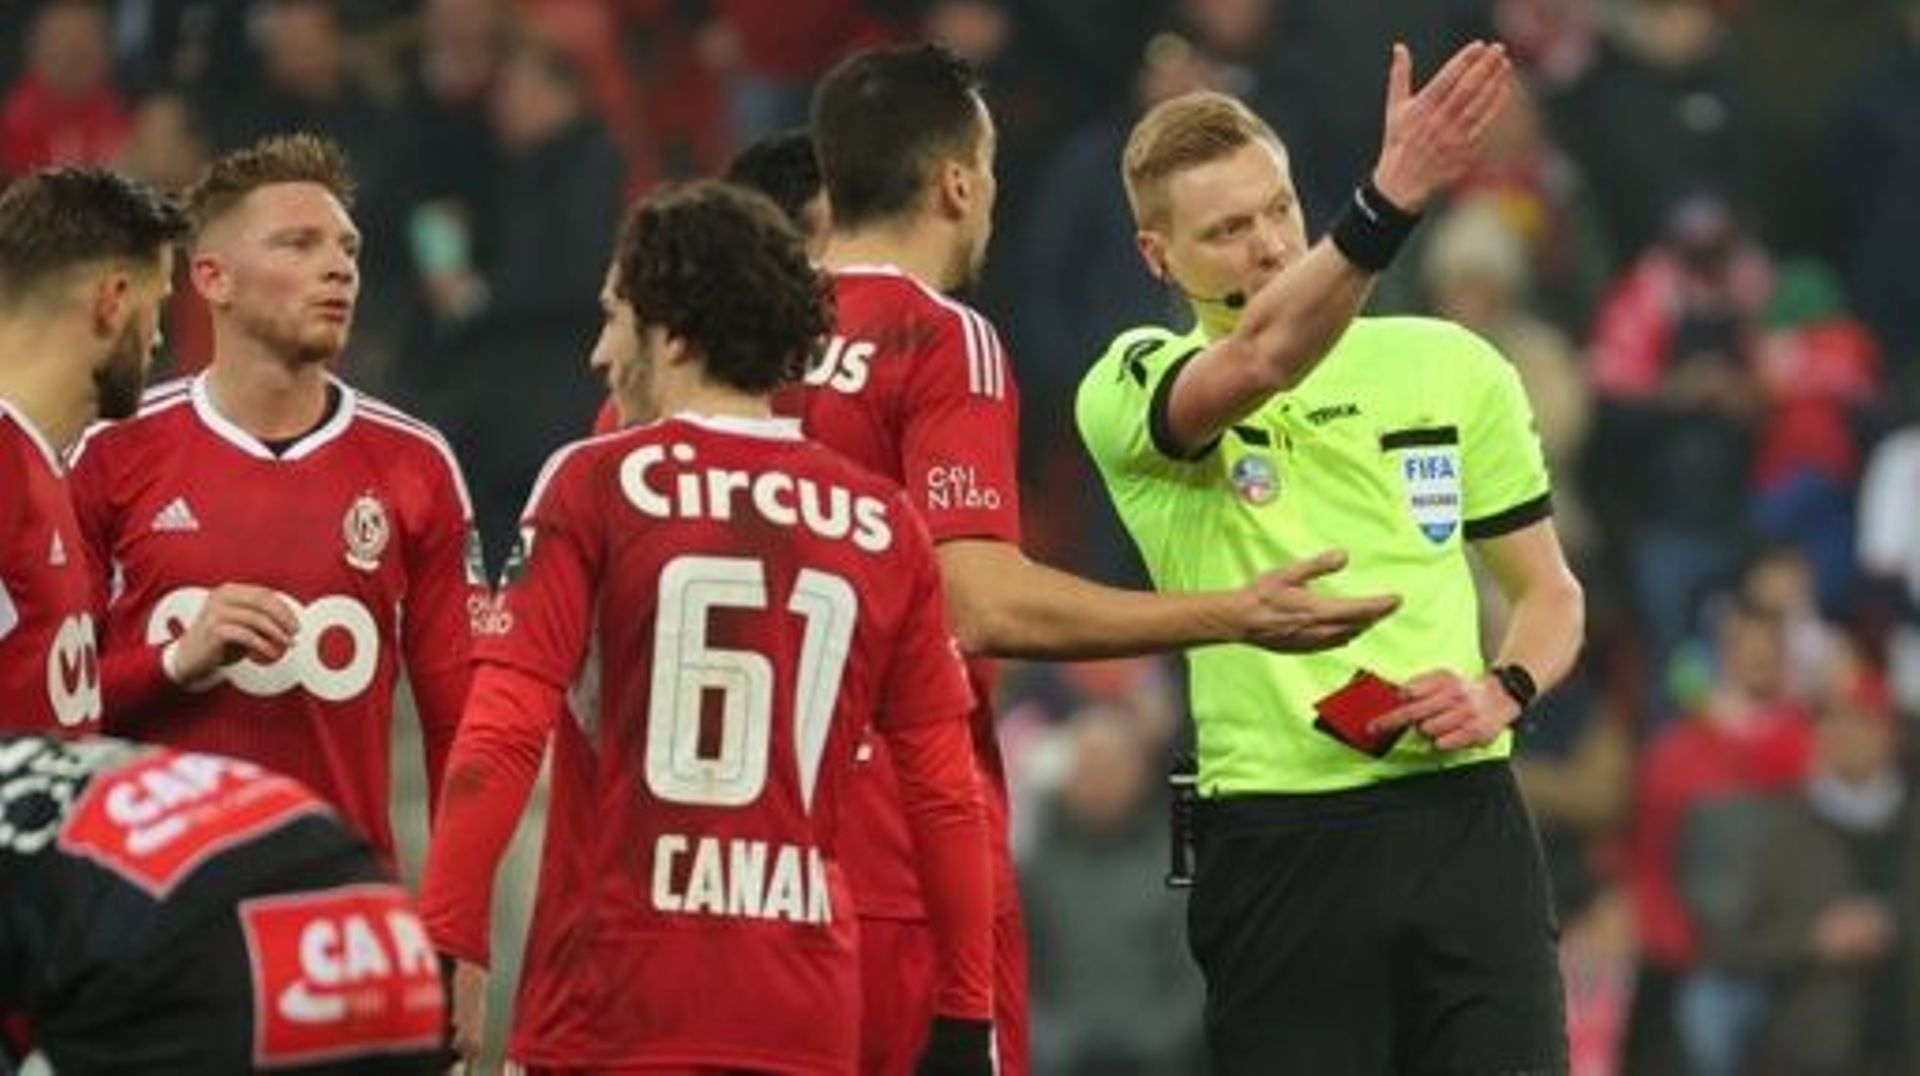 Standard’s Konstantinos Kostas Laifis receives a red card from referee Lothar D’Hondt during a soccer match between Standard de Liege and KV Kortrijk, Sunday 12 February 2023 in Liege, on day 25 of the 2022-2023 'Jupiler Pro League' first division of the